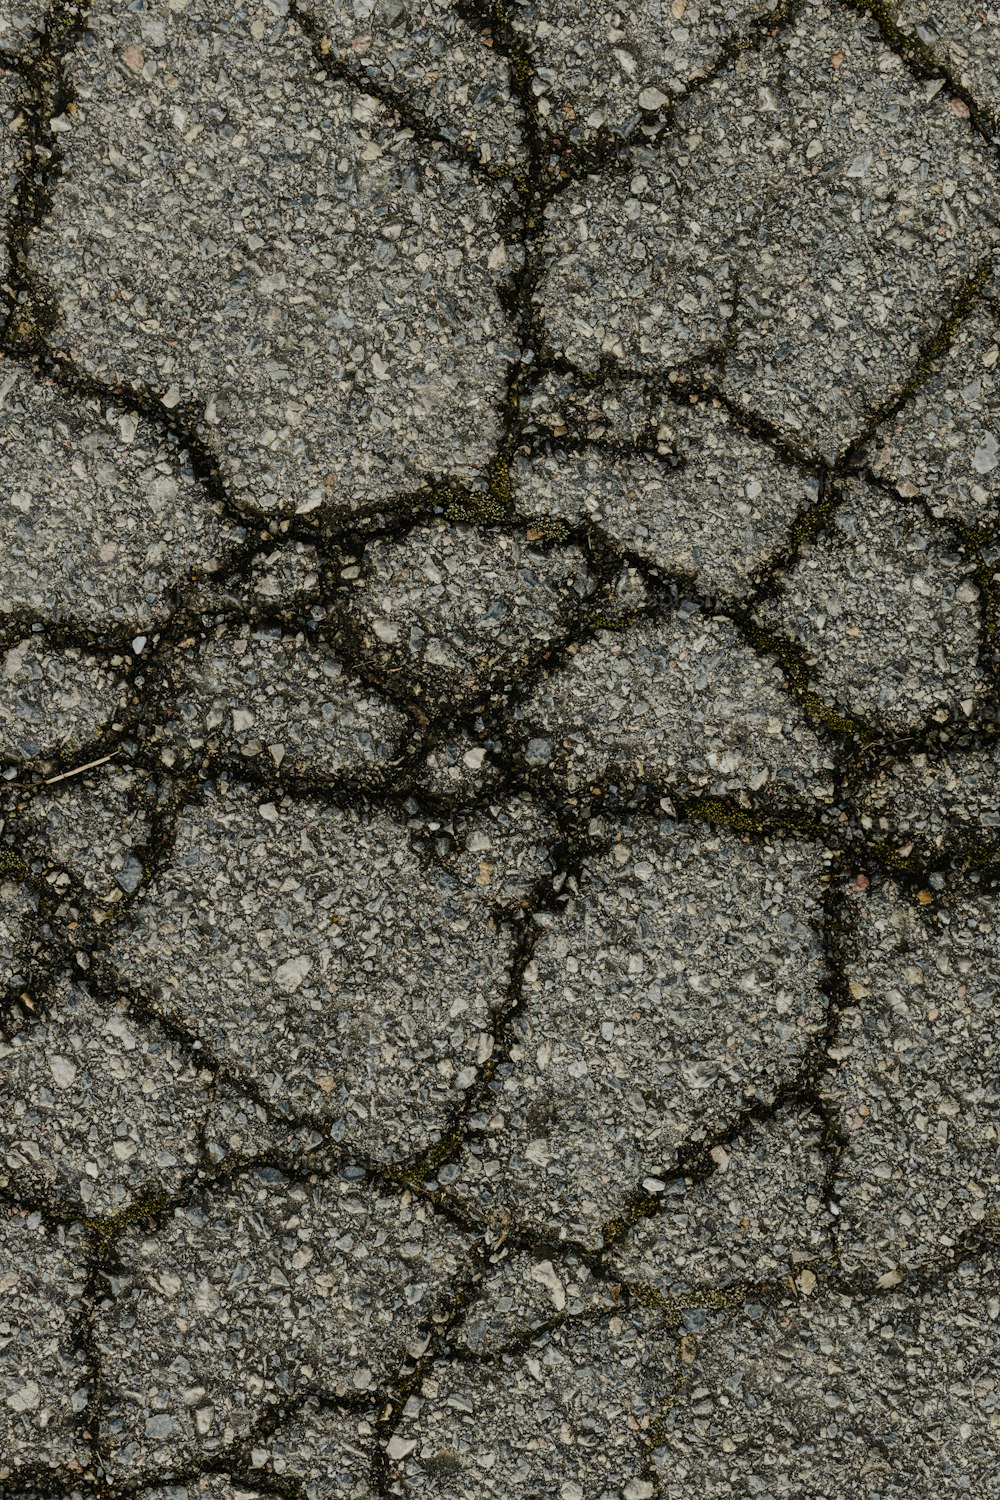 a black and white photo of a cracked road